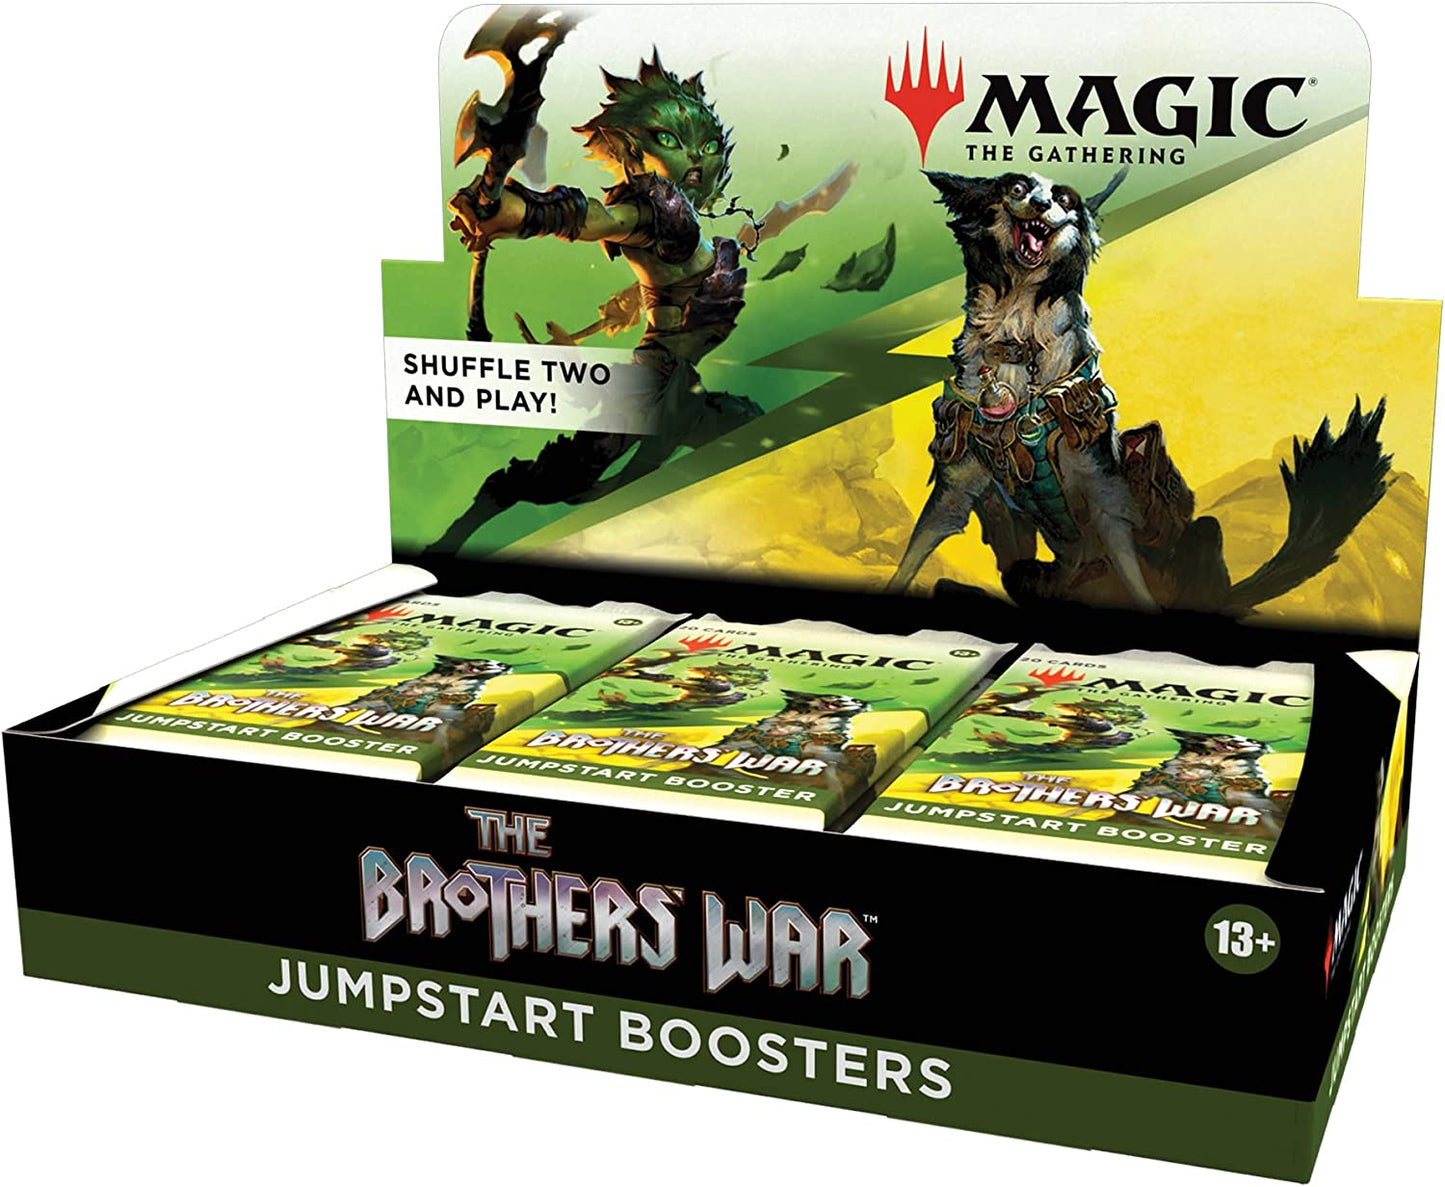 Magic: The Gathering Jumpstart Booster Box - The Brothers’ War